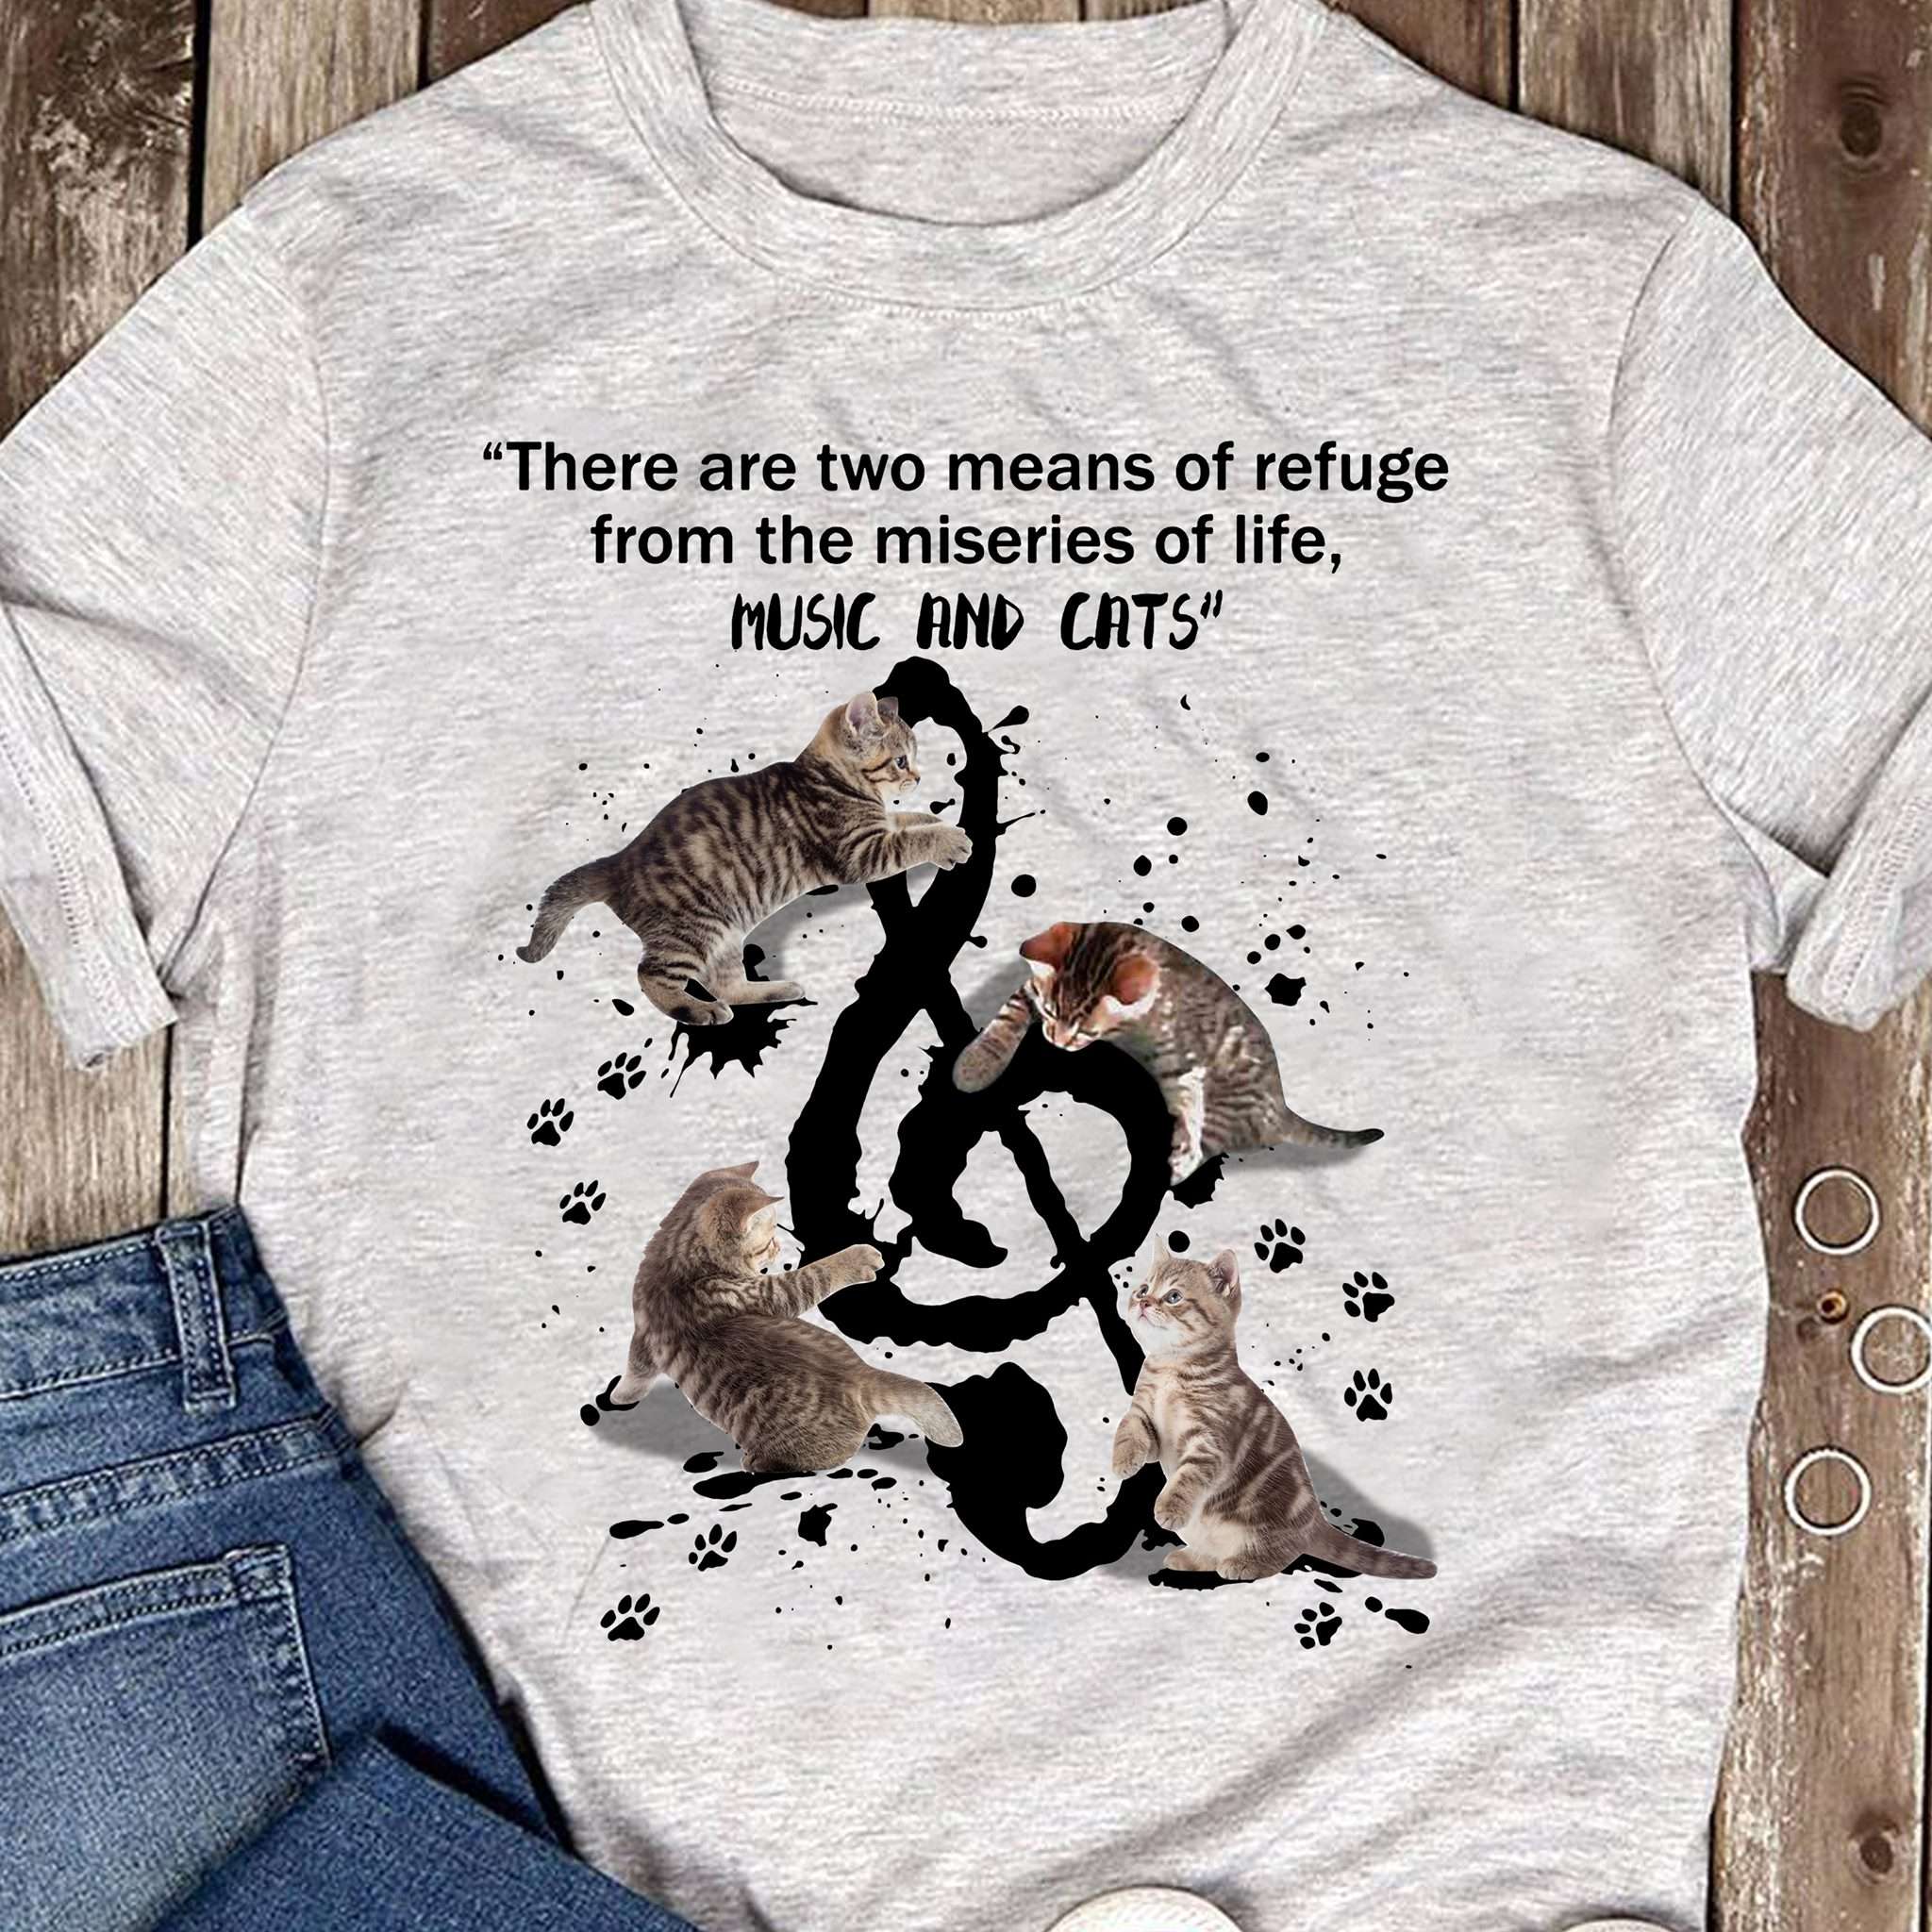 Music Note And Cat - There are two means of refuge from the miseries of life music and cats